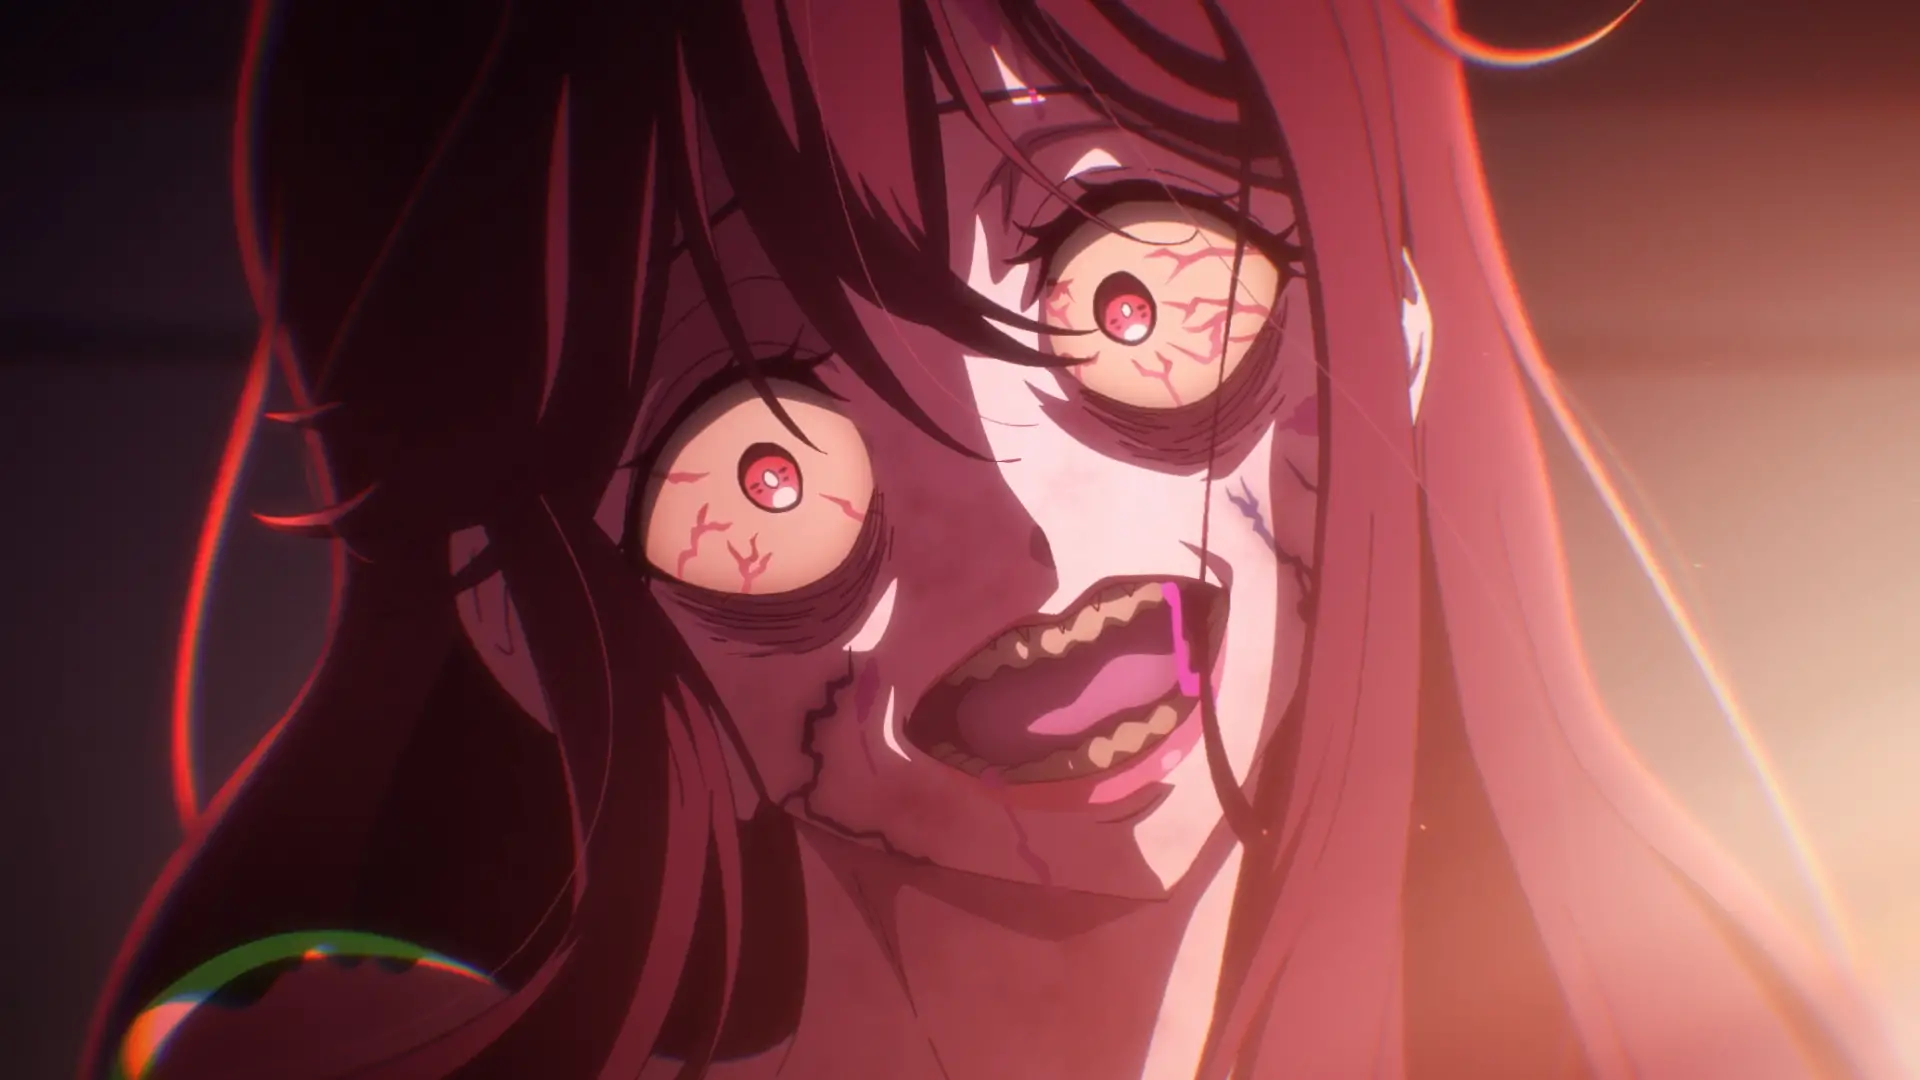 This New Zombie Anime Will Make You Actually Root for the Apocalypse